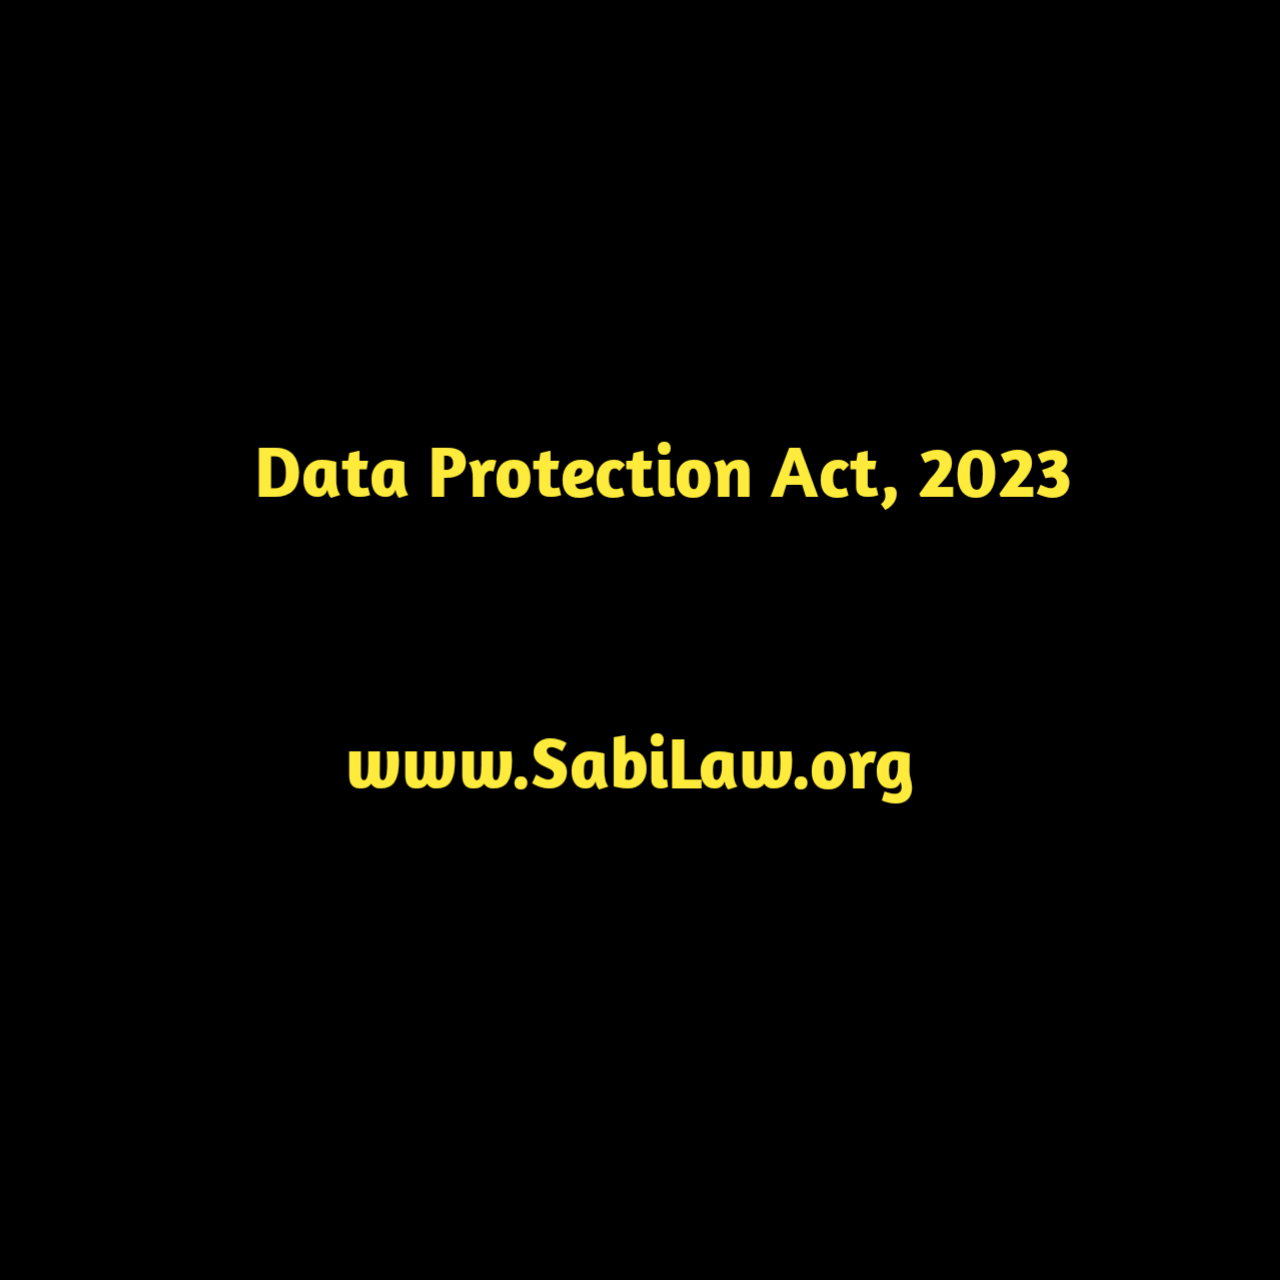 Data Protection Act, 2023